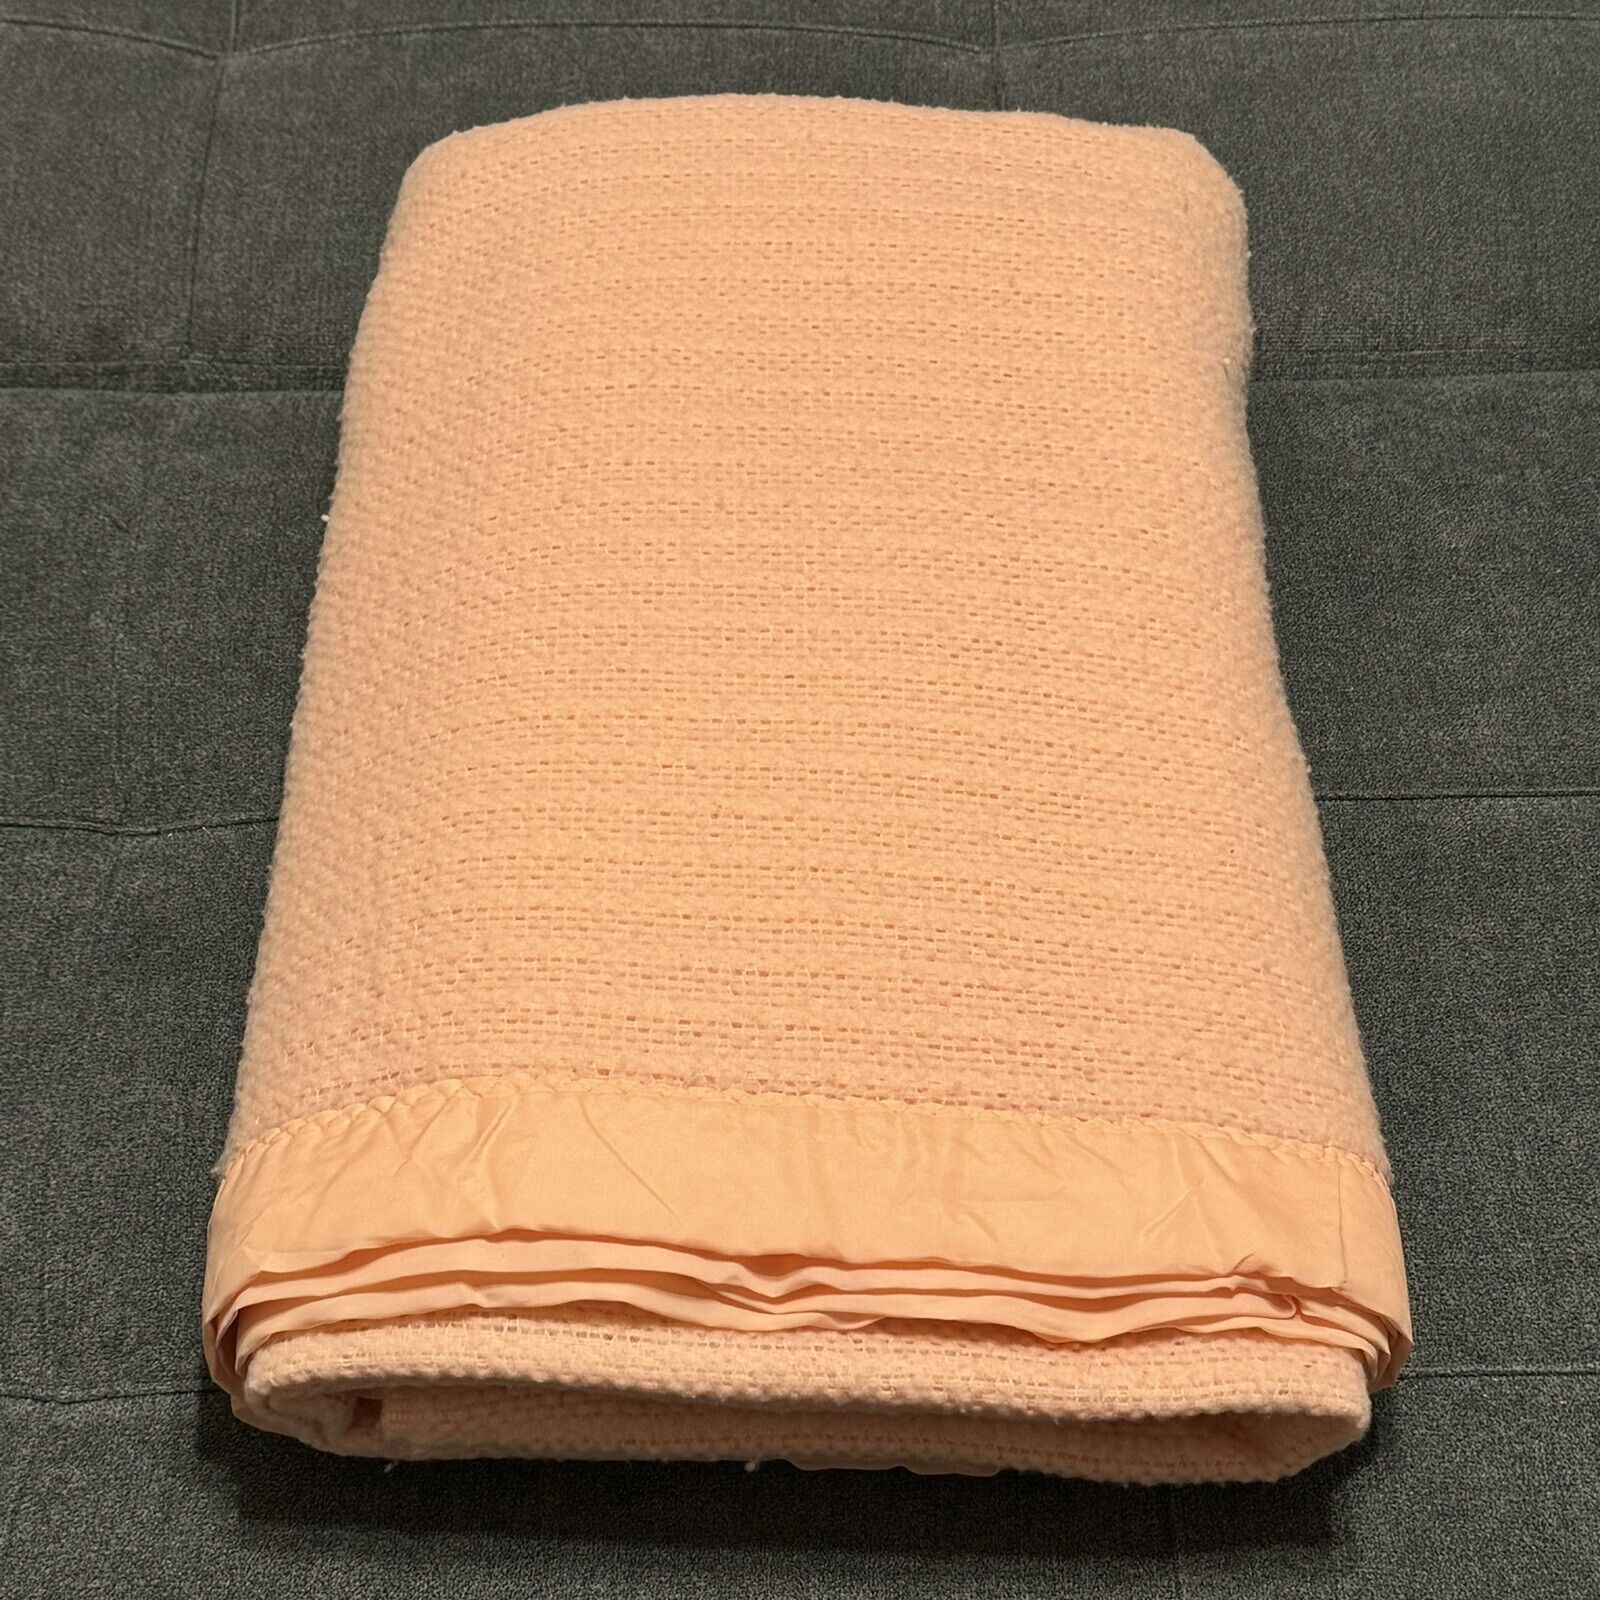 Vintage Satin Edge Blanket Pink Peach Made in USA 82 x 90 Queen Size